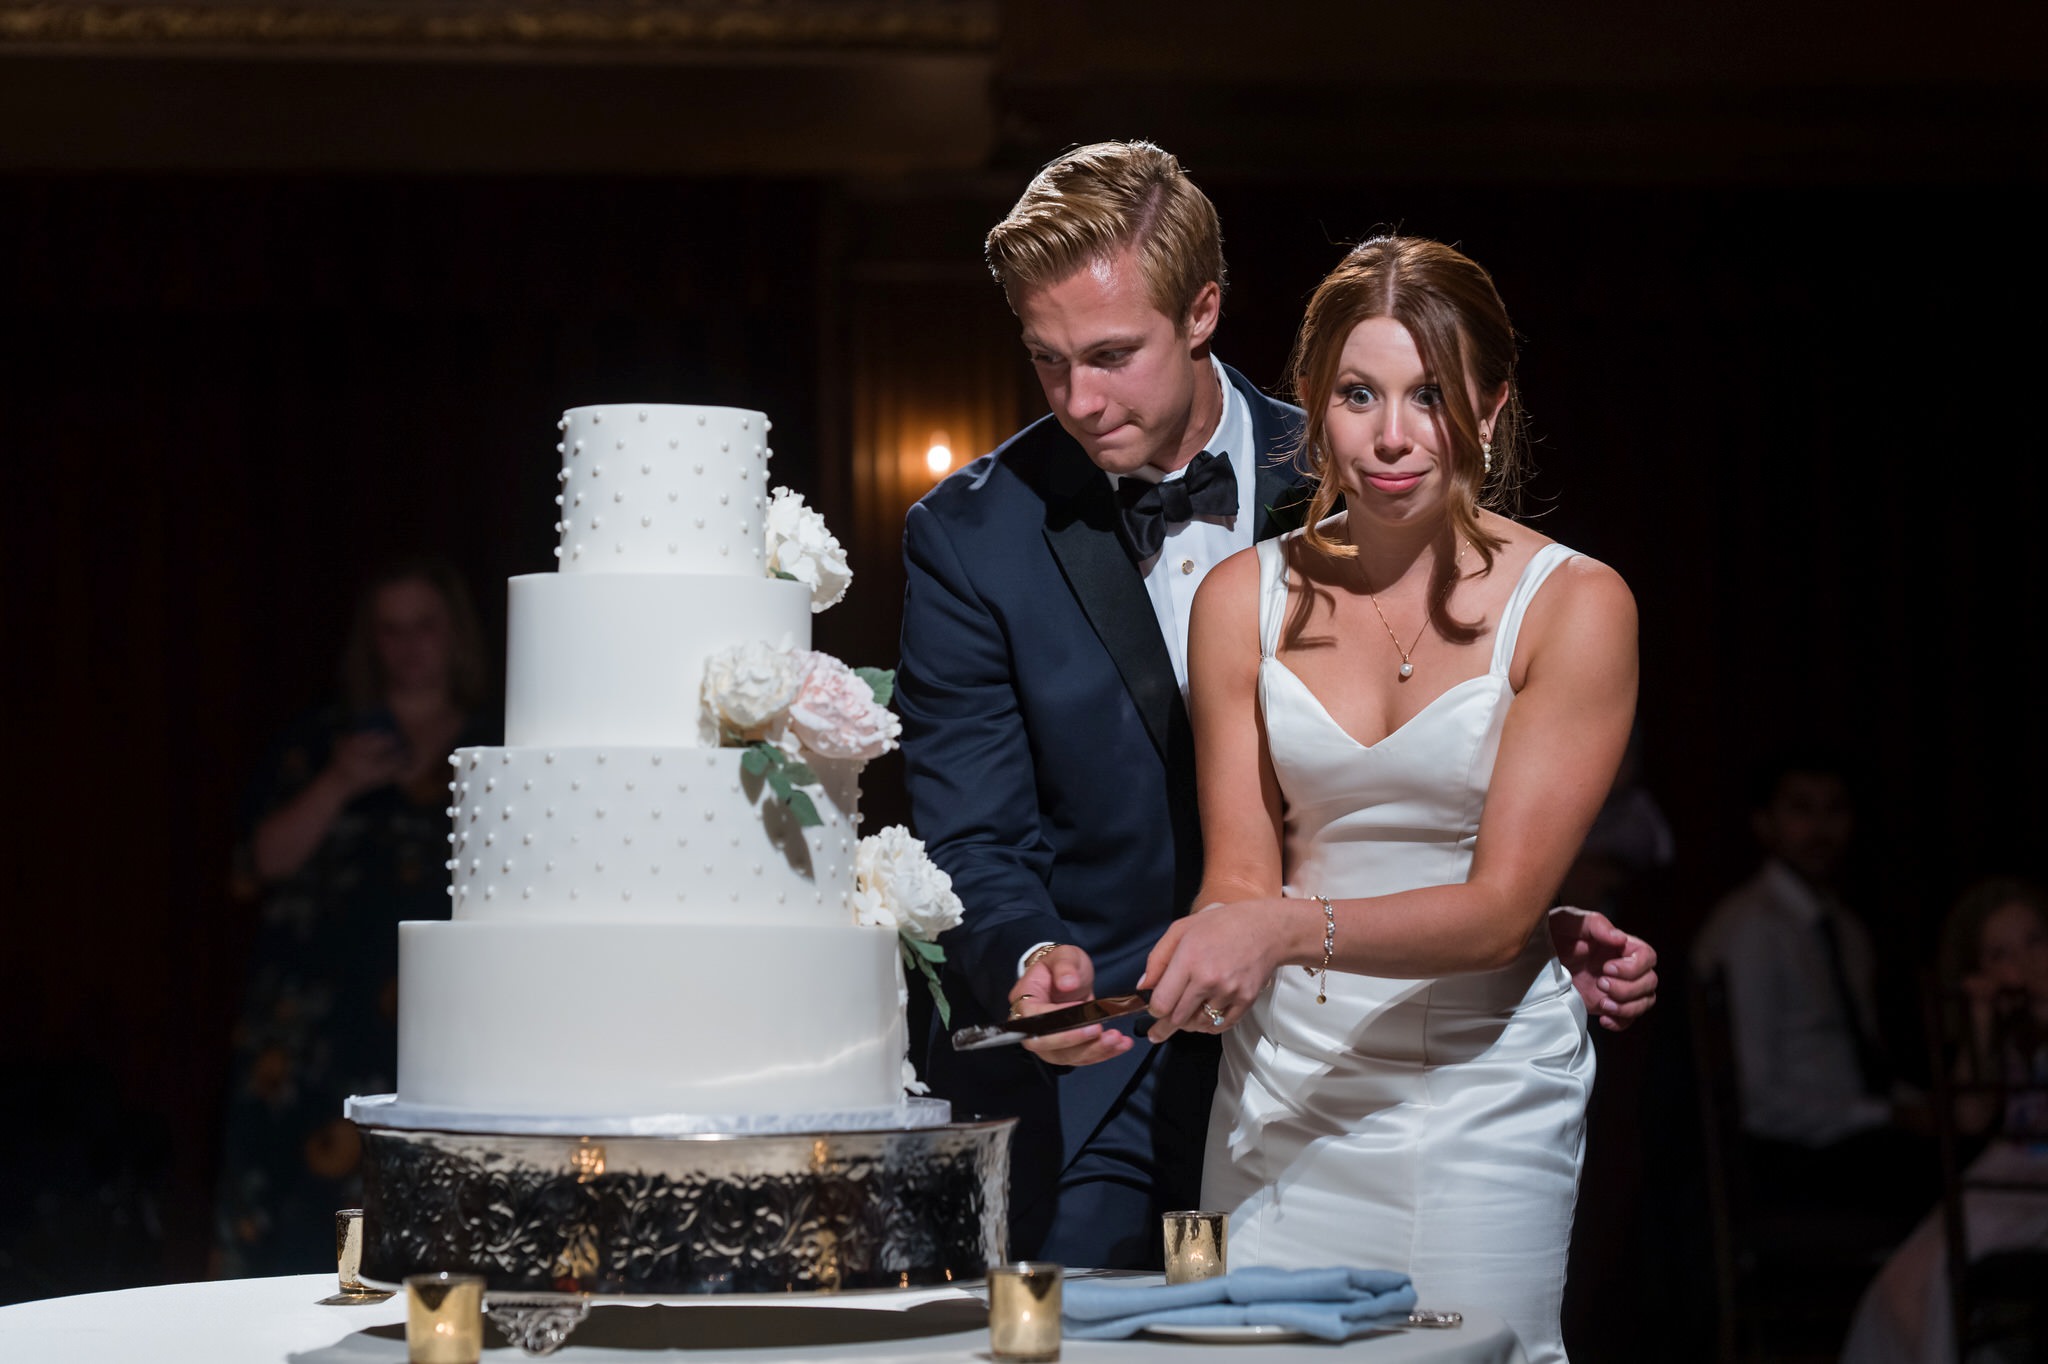 A bride reacts to cutting a wedding cake during their Gem Theatre Detroit wedding.  